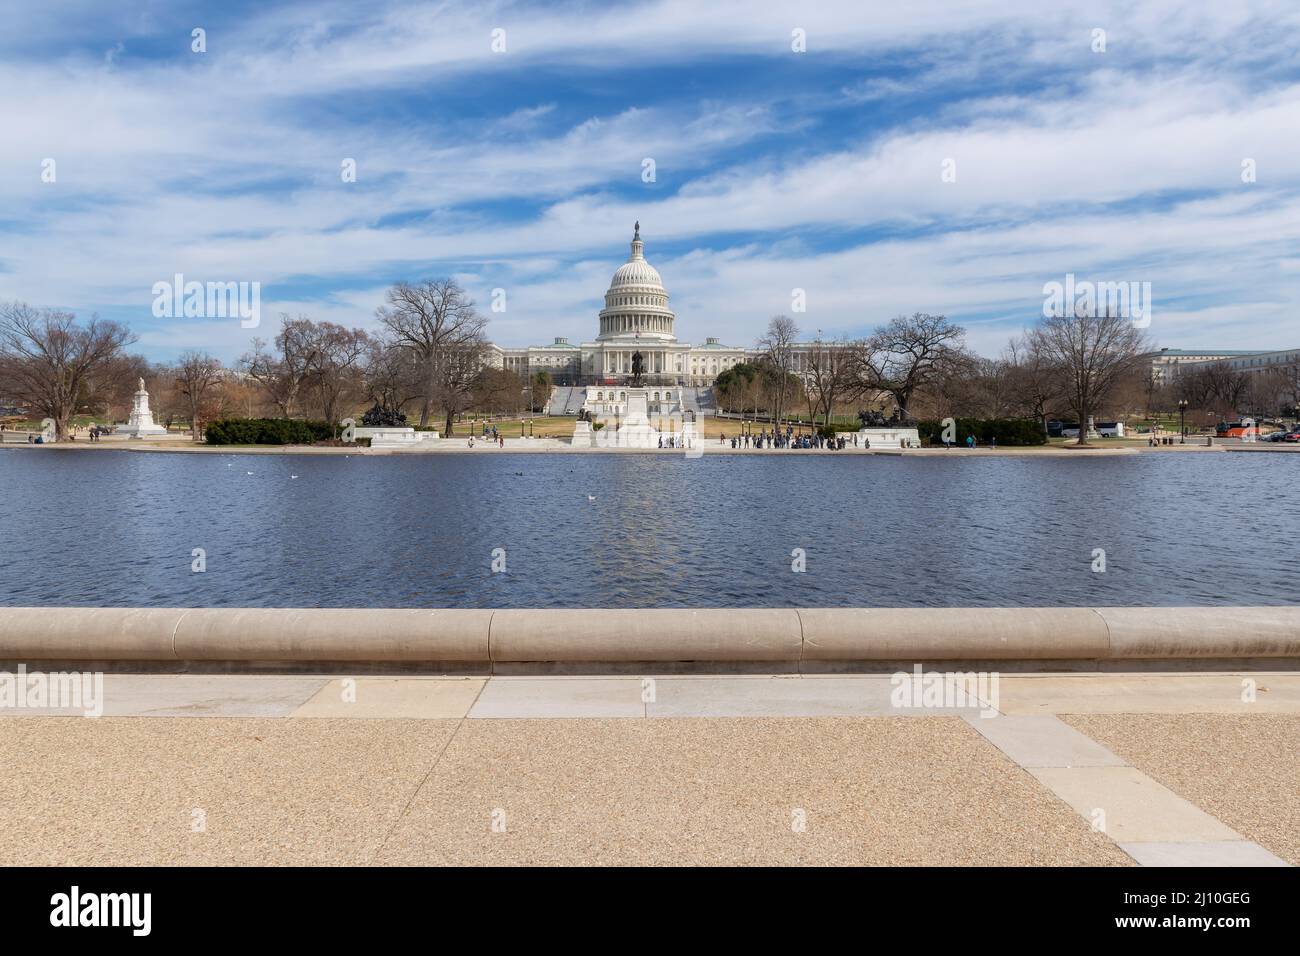 United States Capitol building at sunny day in Washington DC. Stock Photo